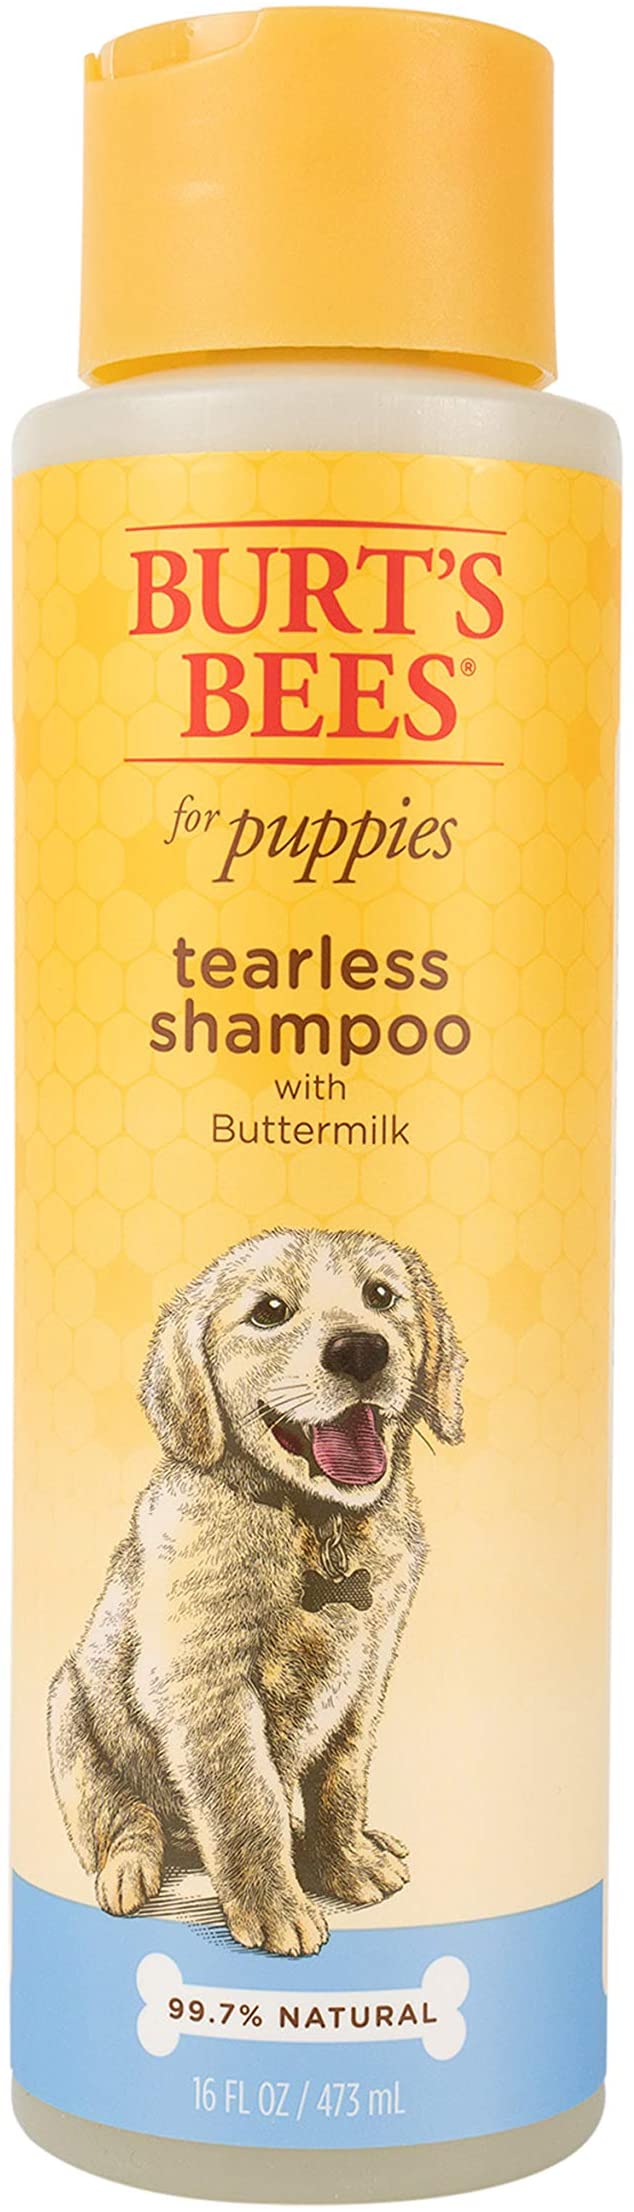 Burt's Bees for Dogs Natural Tearless Puppy Shampoo with Buttermilk - Shampoo for Dogs, Burts Bees for Puppies, Dog Grooming Supplies, Dog Bathing Supplies, Pet Shampoo, Tearless Dog Shampoo